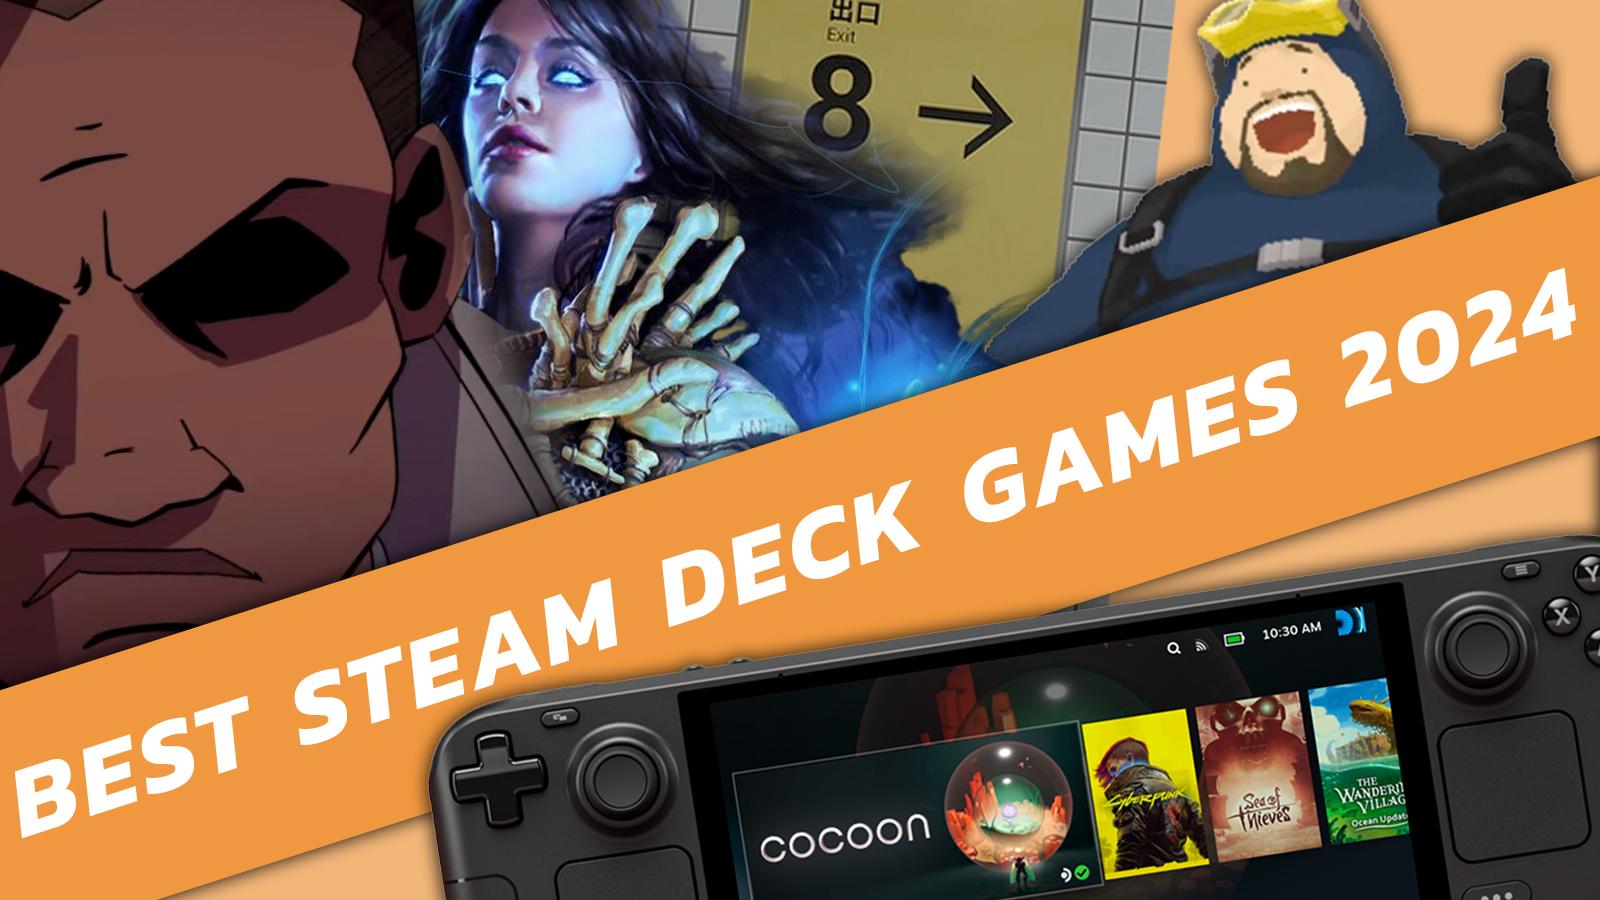 Best Steam Deck Games 2024 - includes images from Path of Exile, El Paso Elsewhere, Dave the Diver and Exit 8